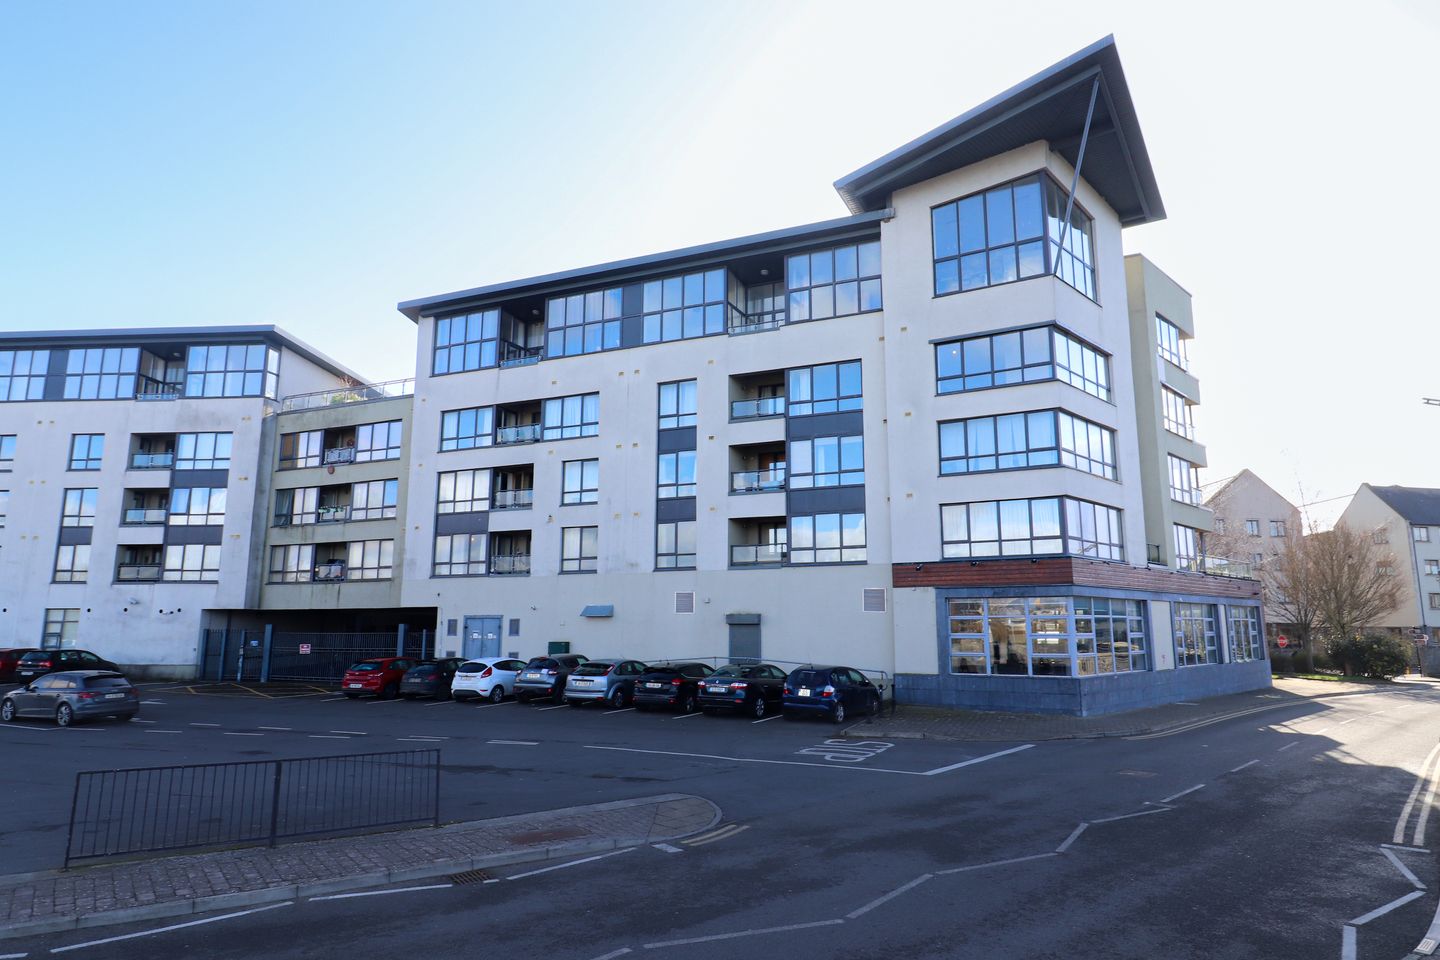 Apartment 301, Riverdell, Carlow Town, Co. Carlow